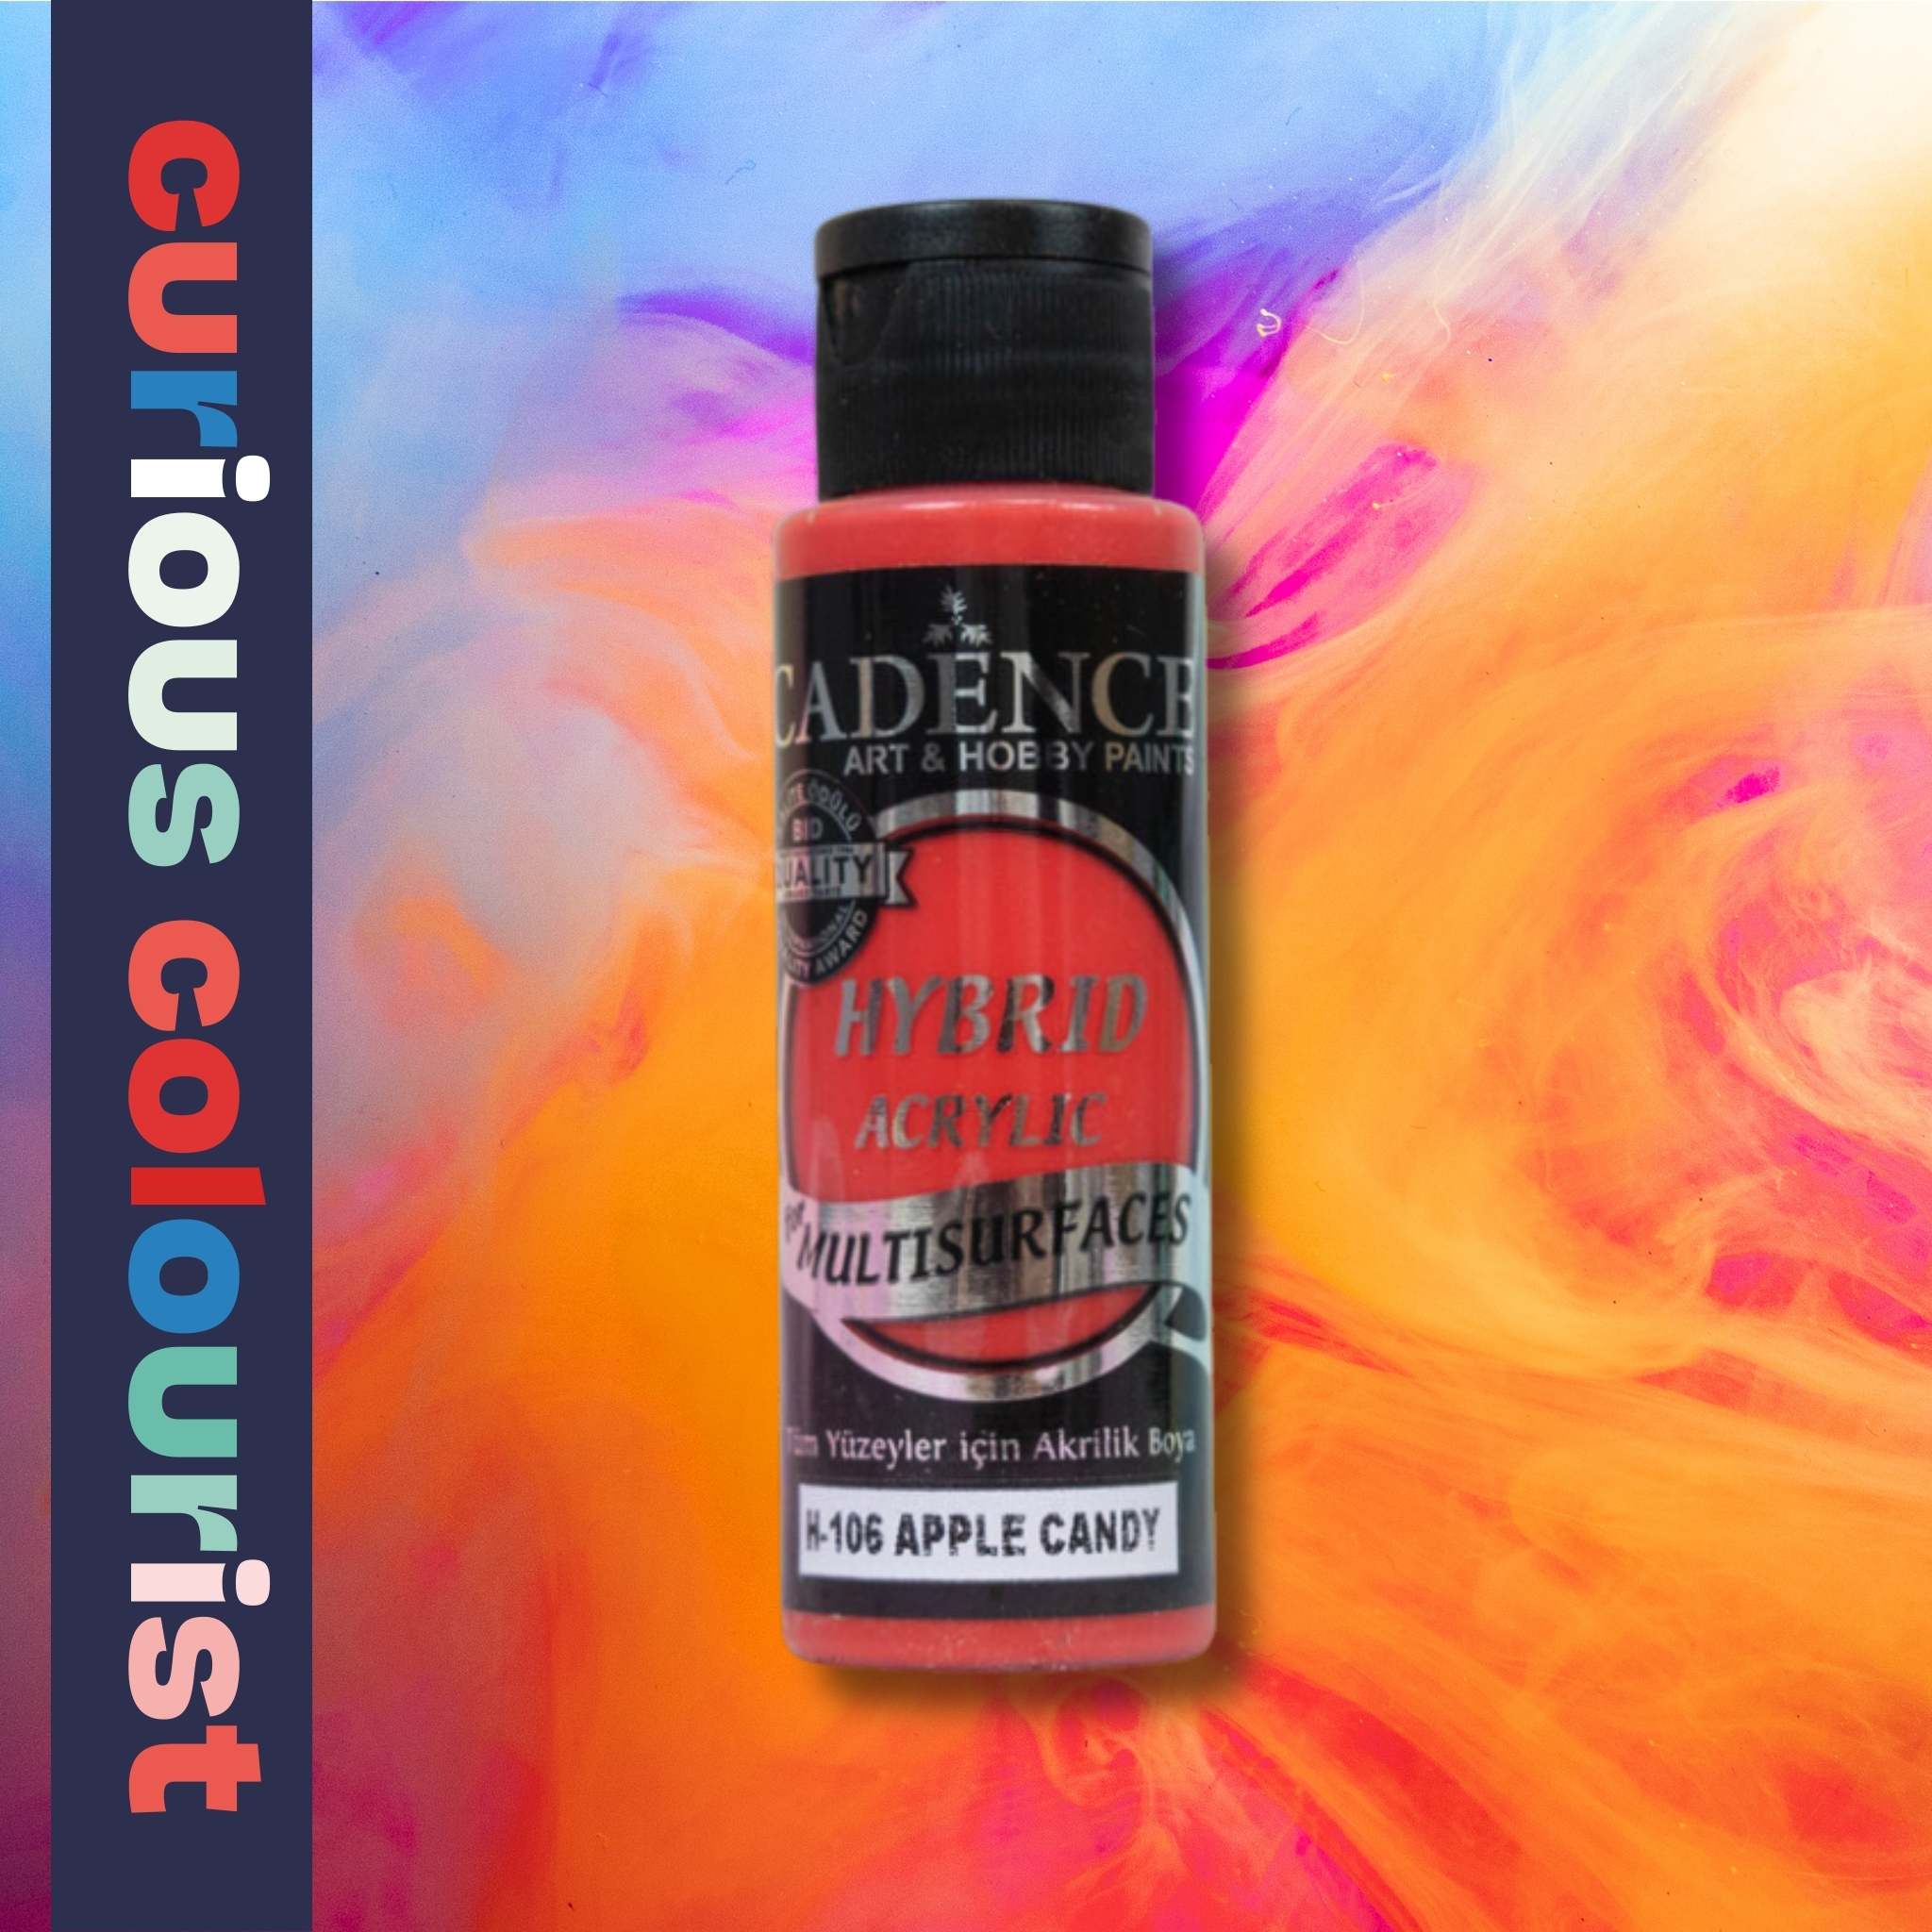 Make your leather craft a work of art with Hybrid Paint. This leathercraft paint is perfect for adding custom colour and decorating your leather creations. Get creative and get crafty - your leather masterpieces await!